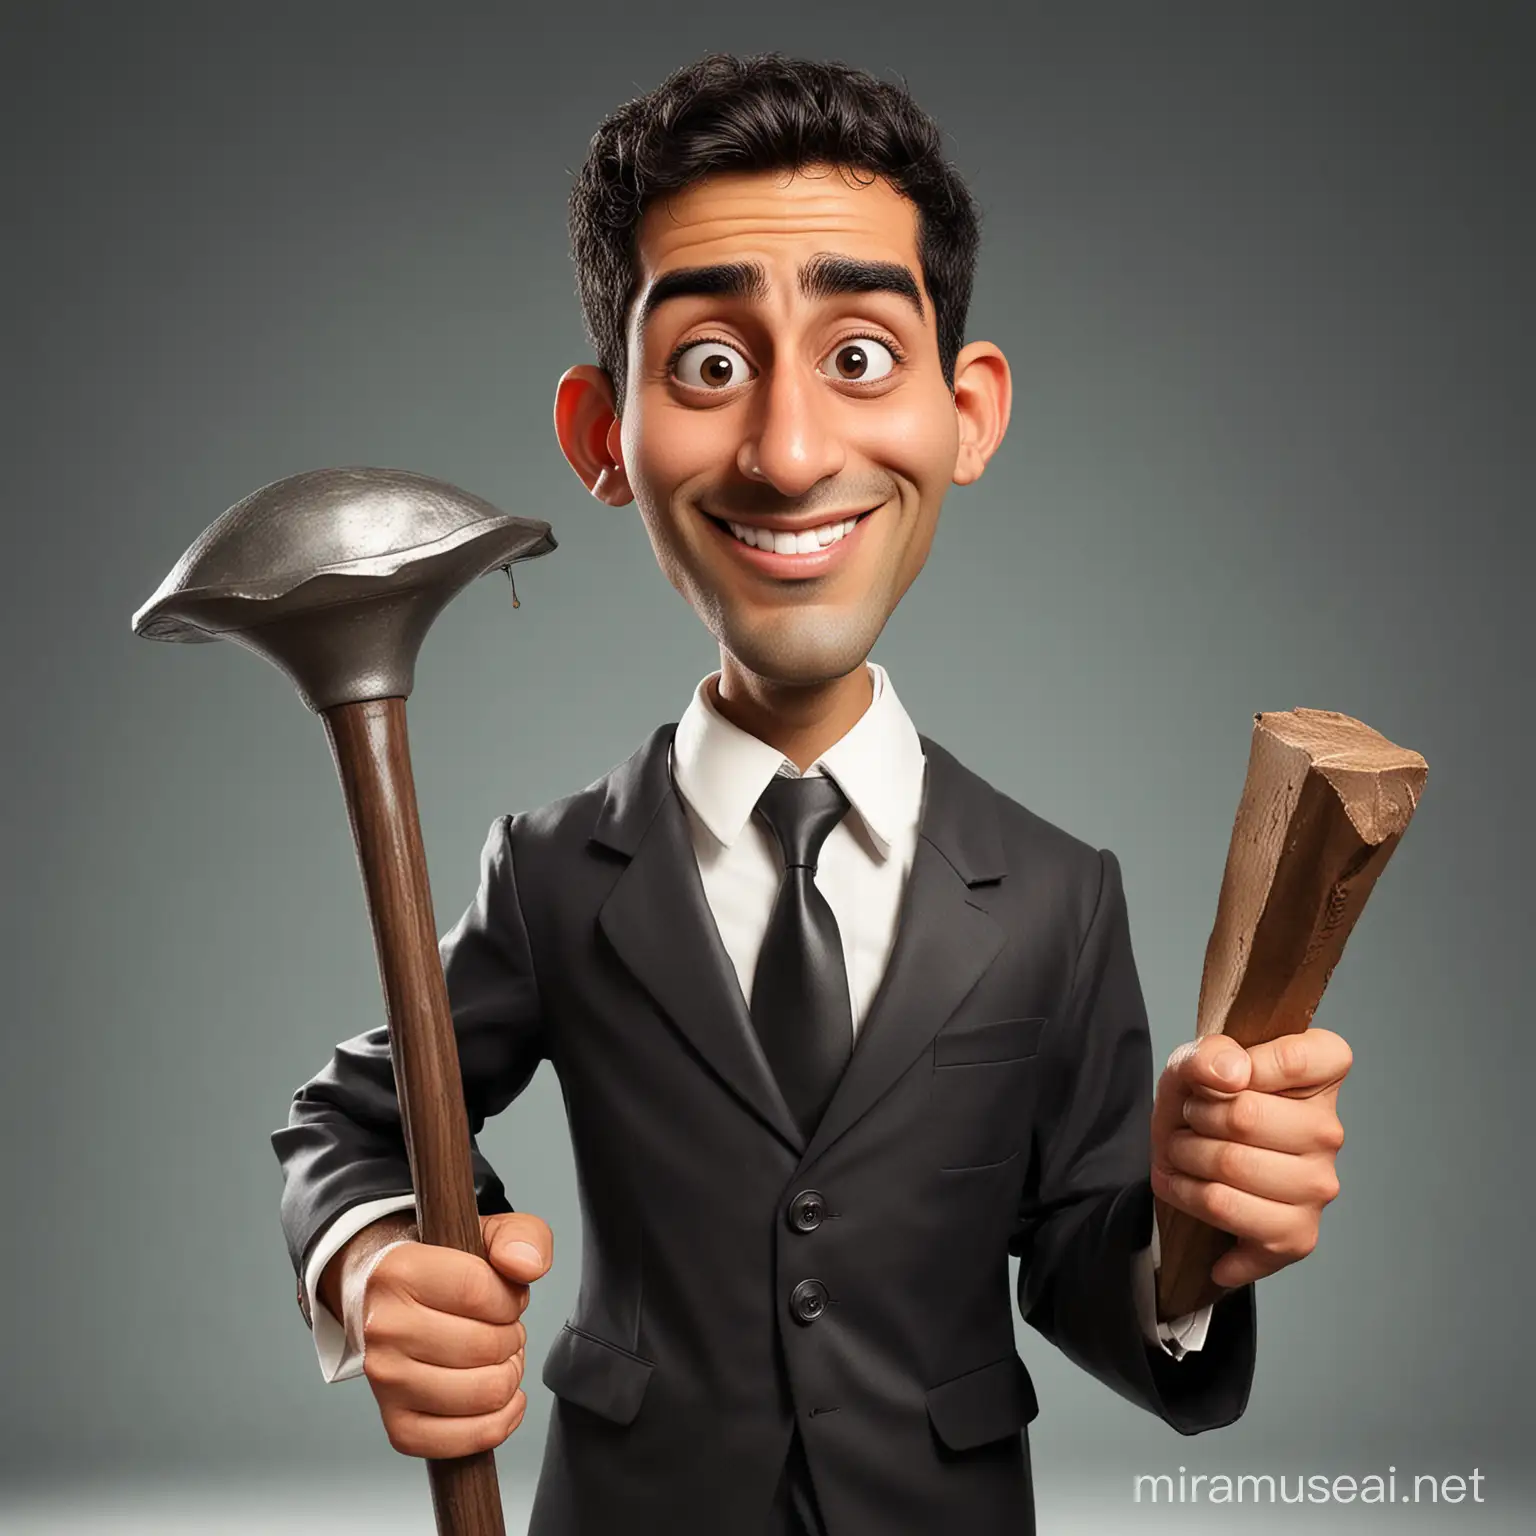 This photo shows a caricature of a beautiful young man of Moroccan origin, stocky, dressed as a lawyer. He comically holds a file hammer. The caricature is executed in a fun, exaggerated style, adding a touch of humor to the image. This image would be perfect for projects related to law, justice, humor, cartoons, and diversity.